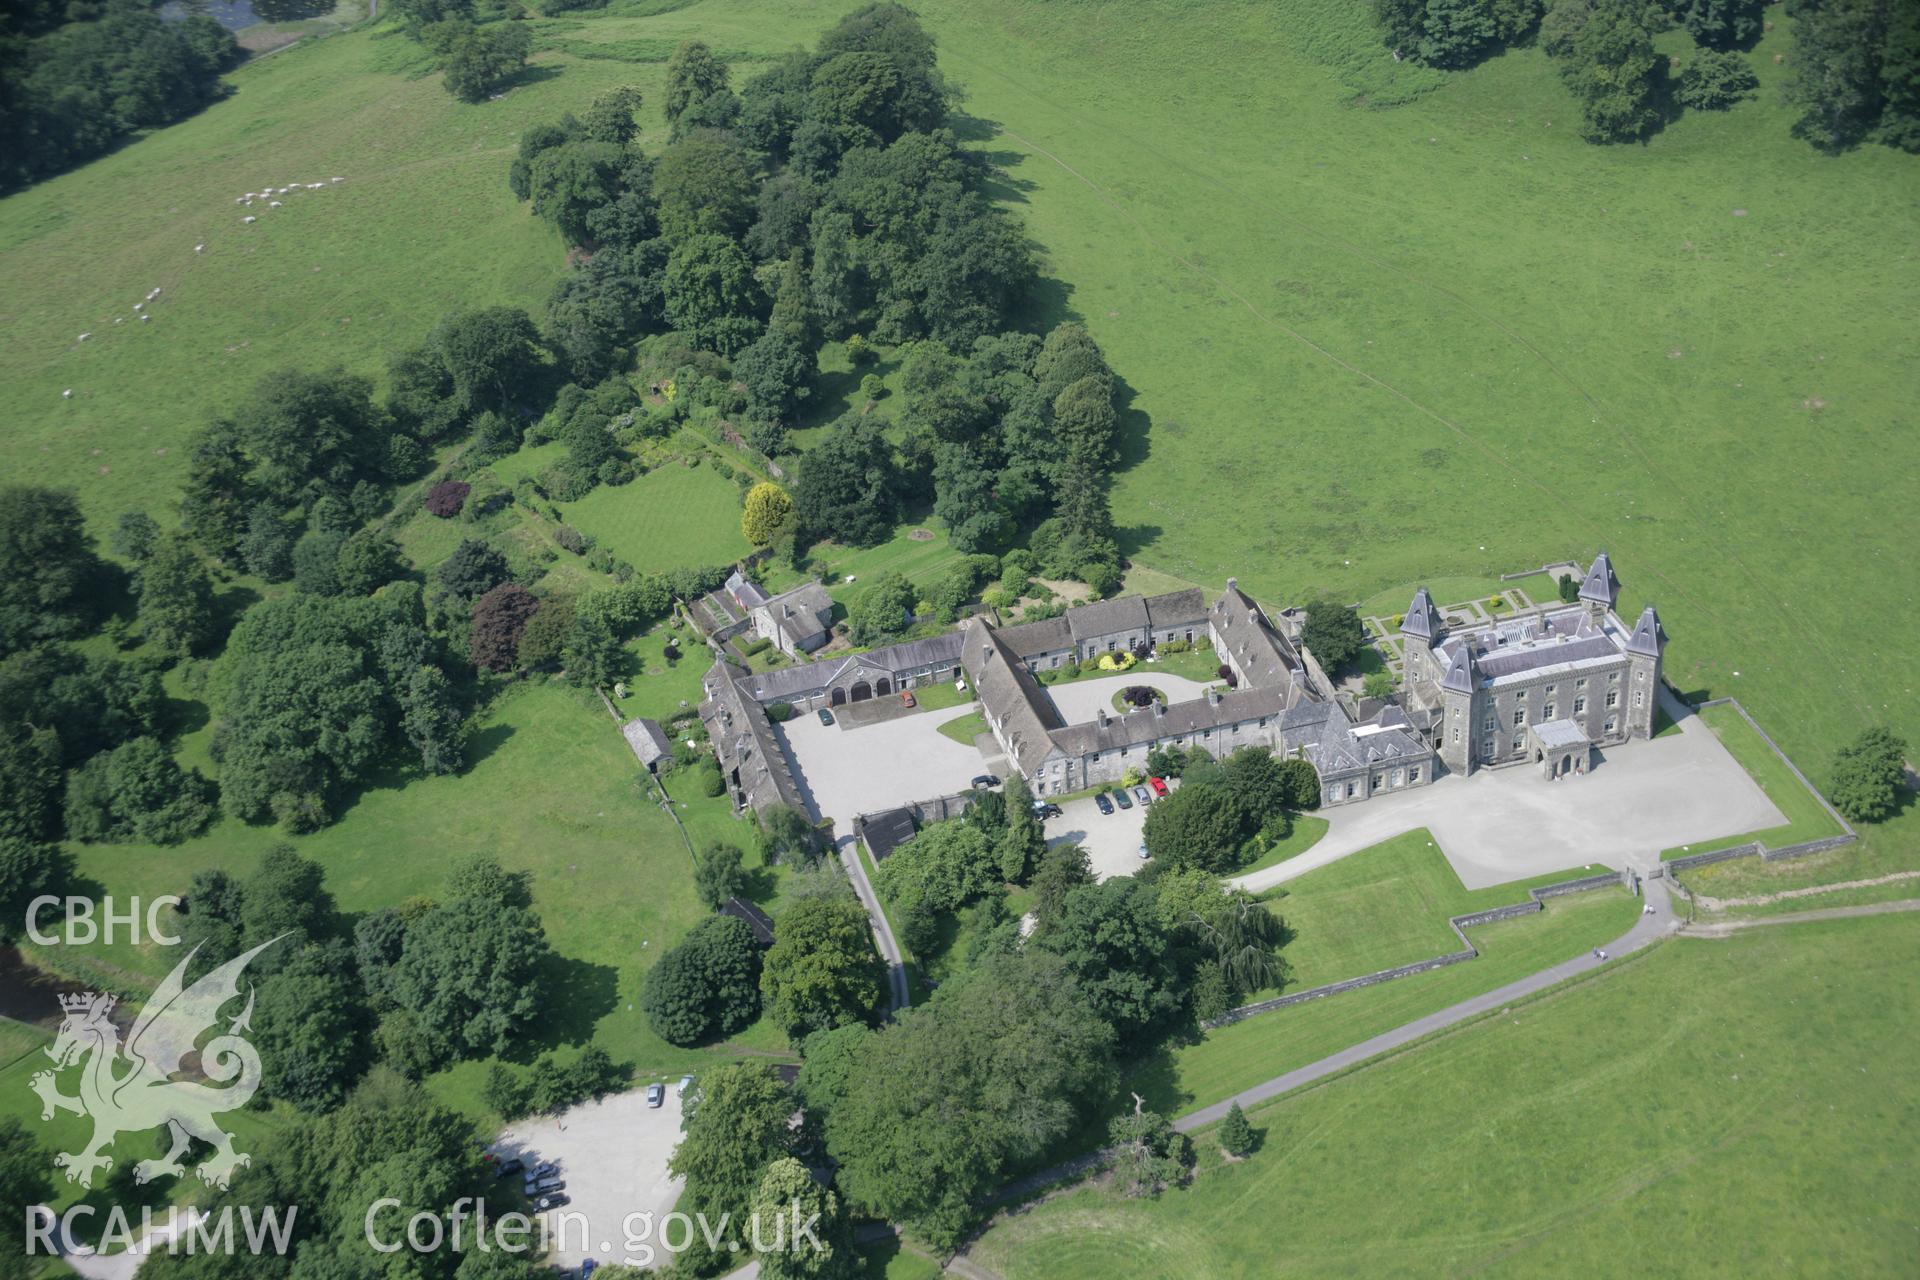 RCAHMW colour oblique aerial photograph of Newton House, (Dinefwr Castle), Llandeilo, in general view from the south-east. Taken on 11 July 2005 by Toby Driver